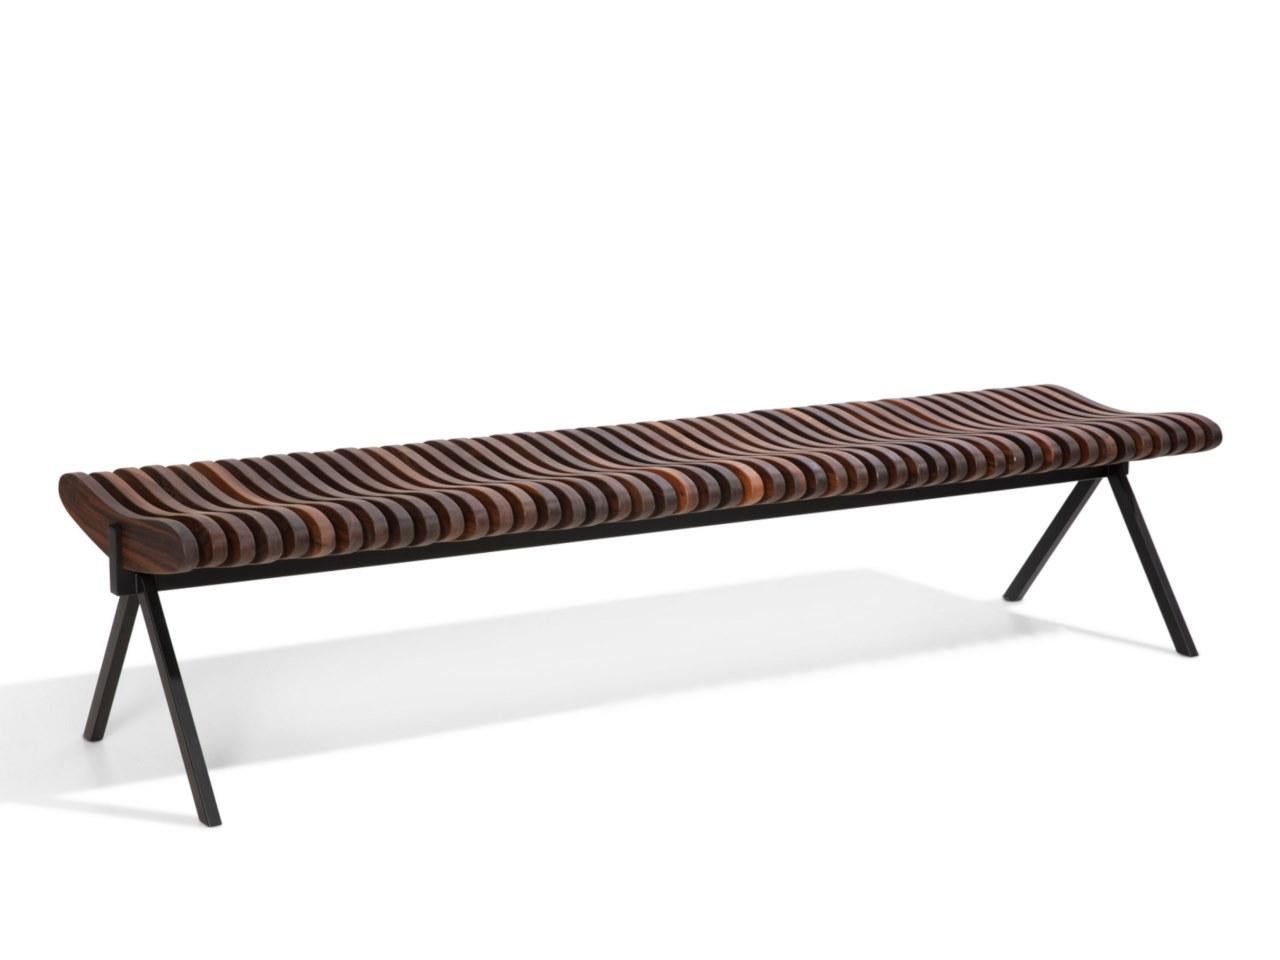 Perlude walnut natural small by Caroline Voet
Dimensions: 120 x H 43 cm
Materials: Walnut natural
Also available in oak natural, seating oak black, seating teak (outdoor).

The PRELUDE benches are assembled from top grade FSC-labelled wood,